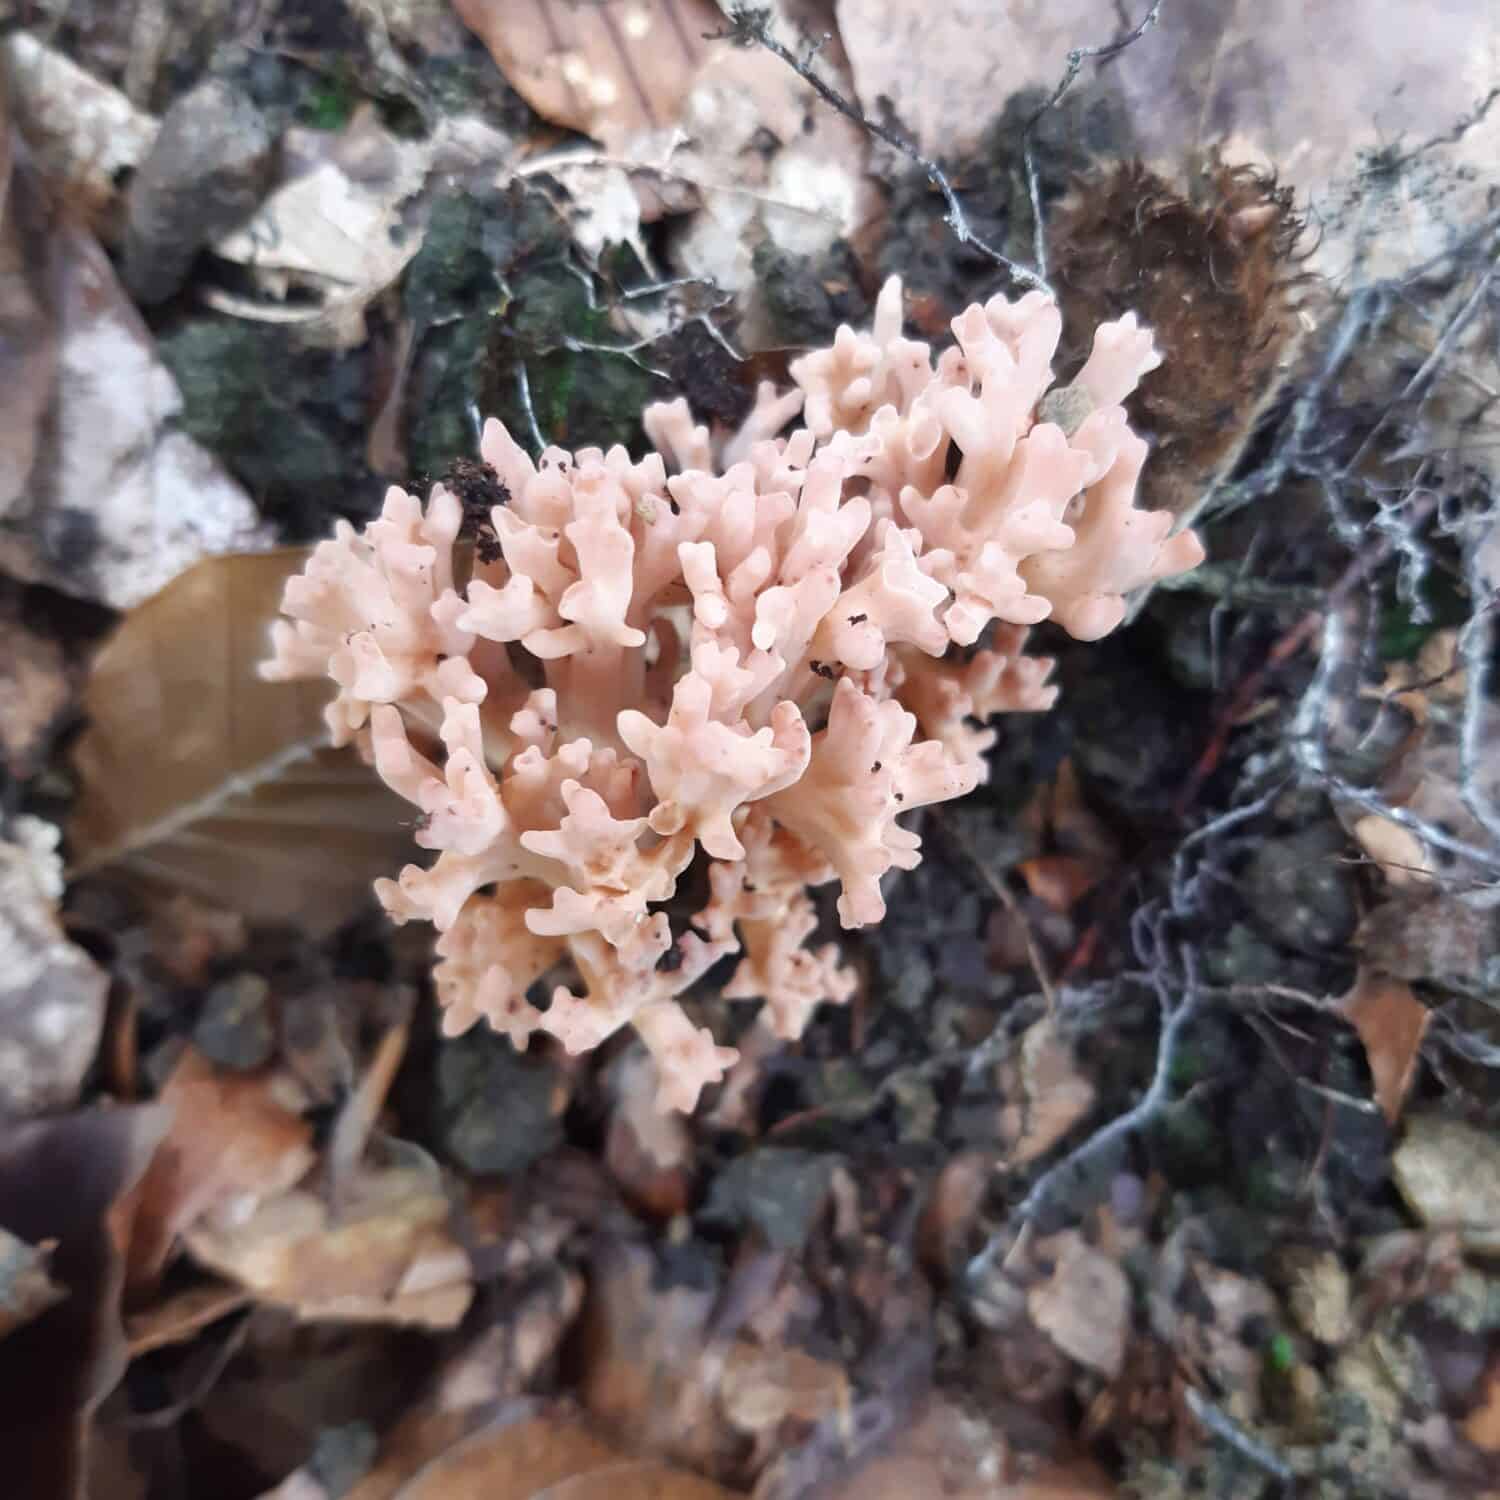 A rare Ramaria formosa, commonly known as the salmon coral, beautiful clavaria, handsome clavaria, yellow-tipped- or pink coral fungus, is a coral fungus found in Asia, Europe and North America.